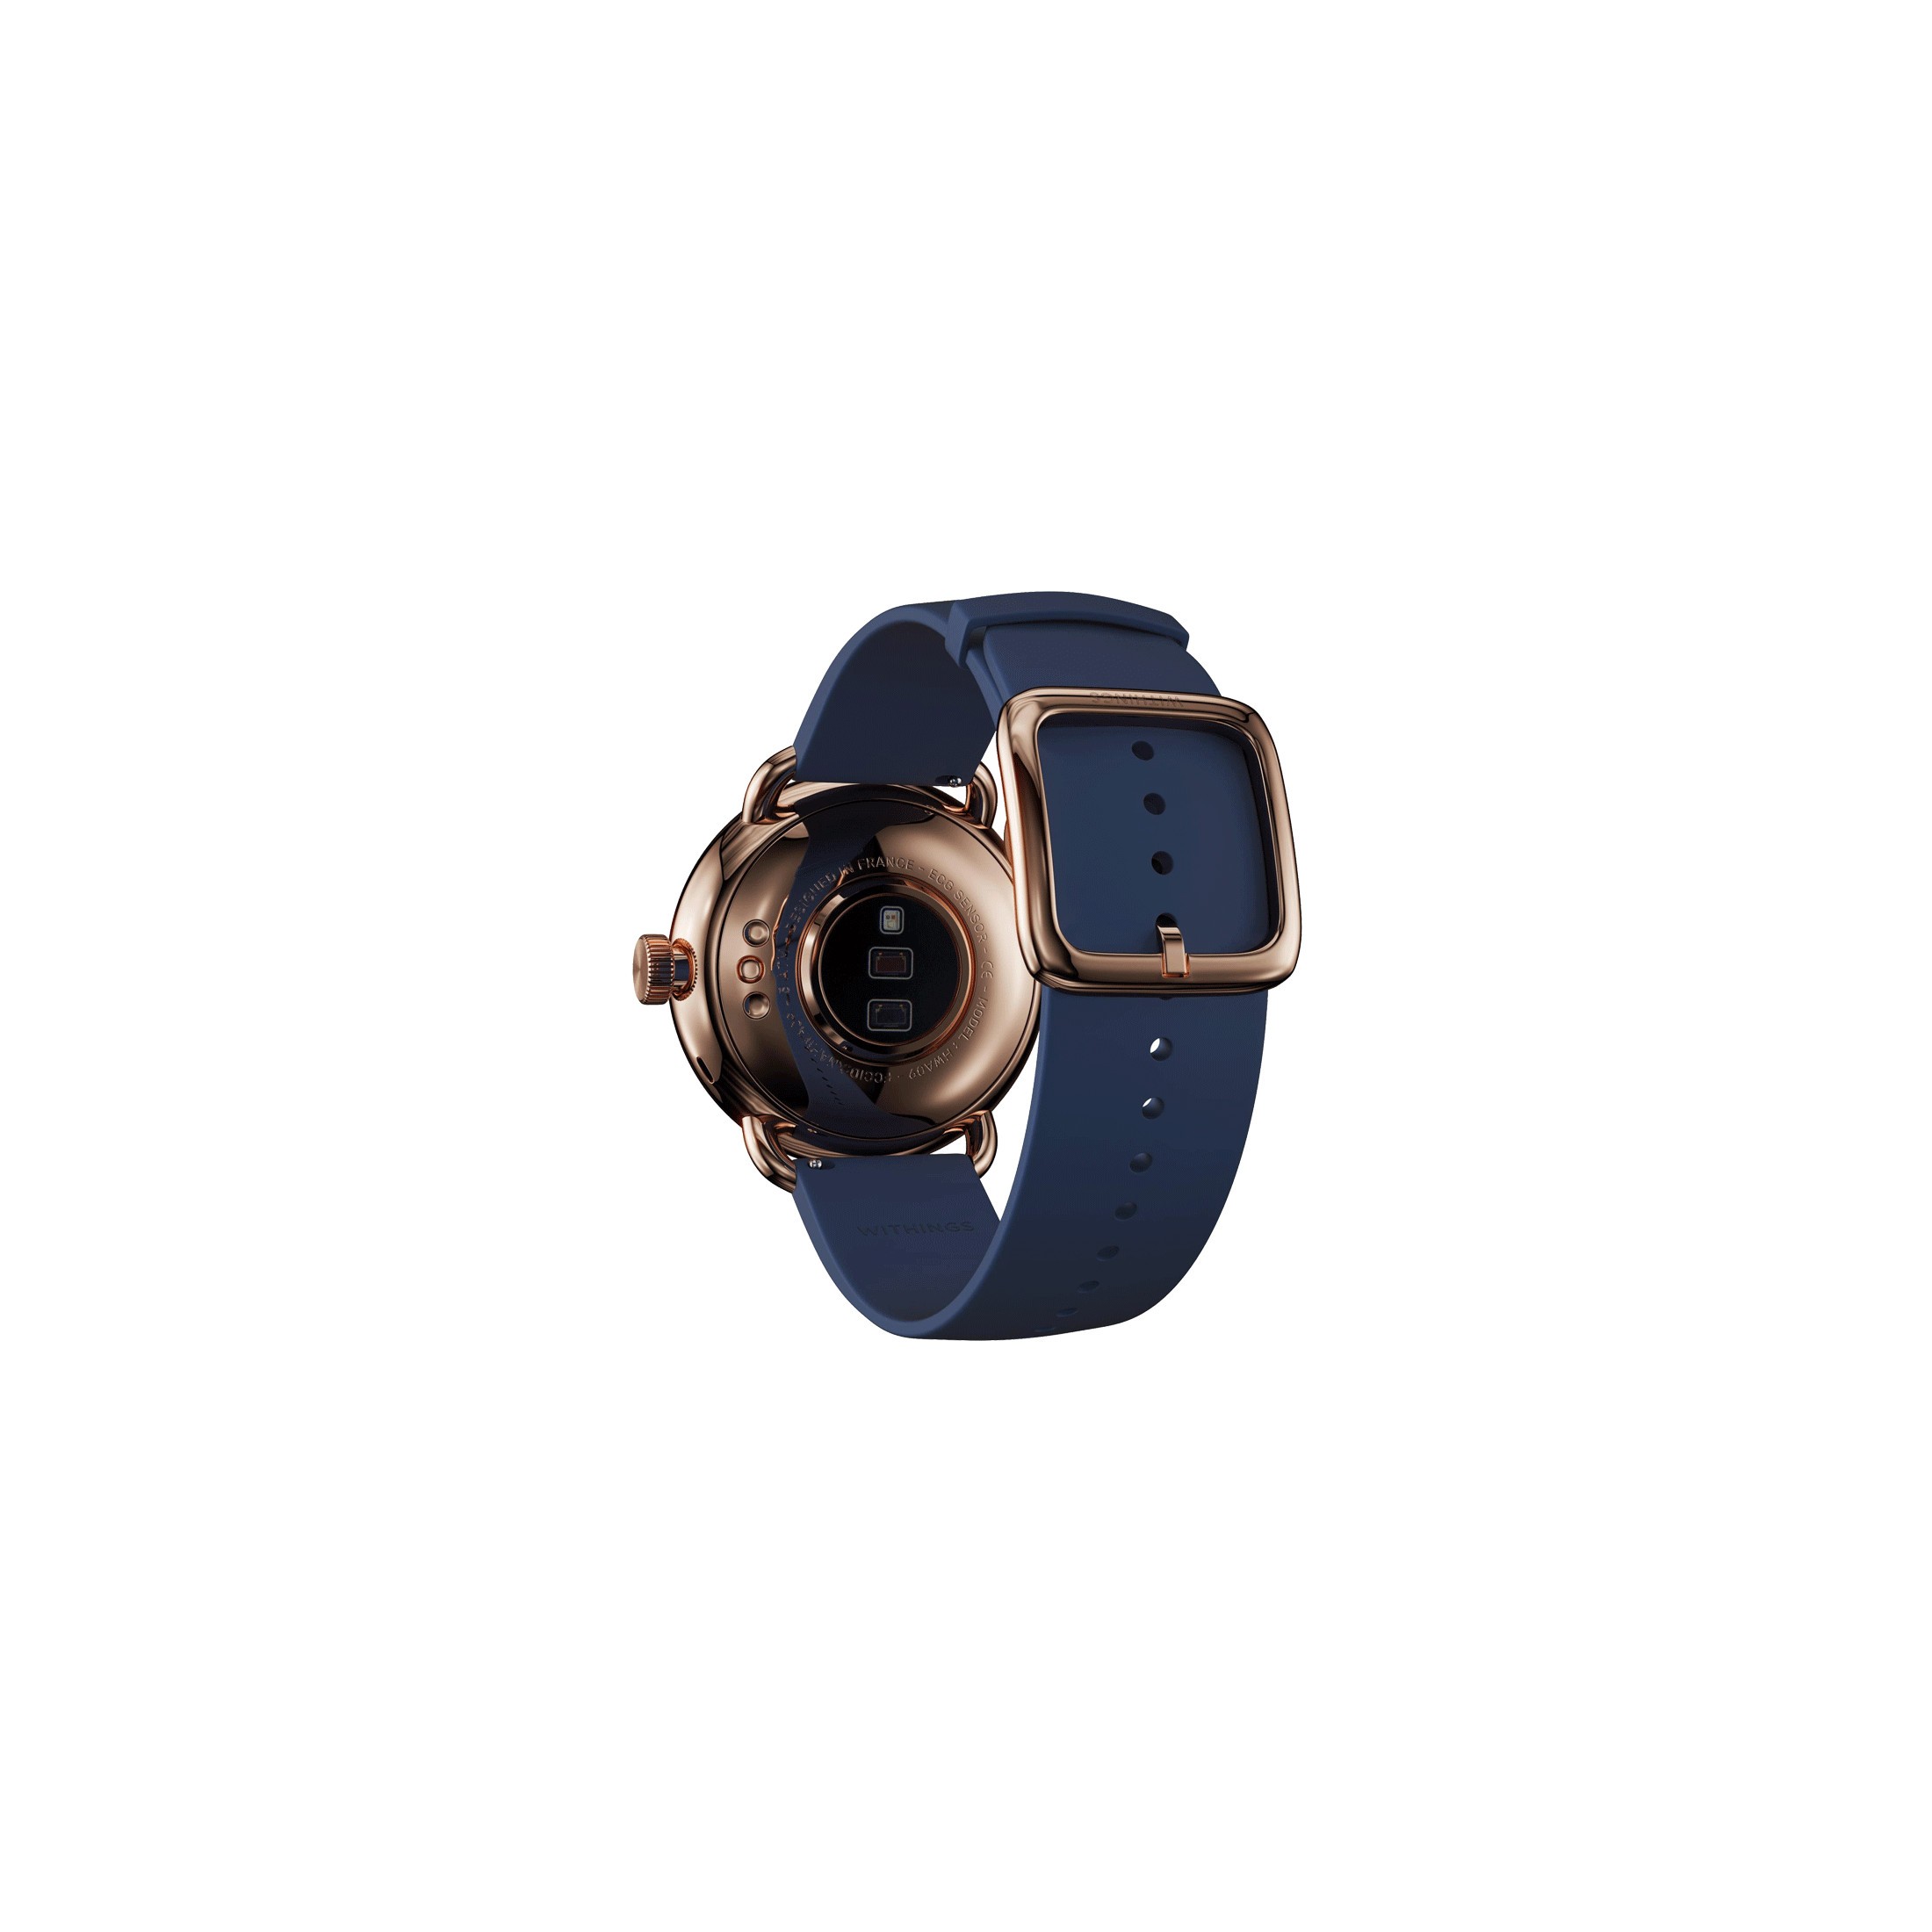 Withings ScanWatch Rose Gold : une smartwatch qui cible les femmes